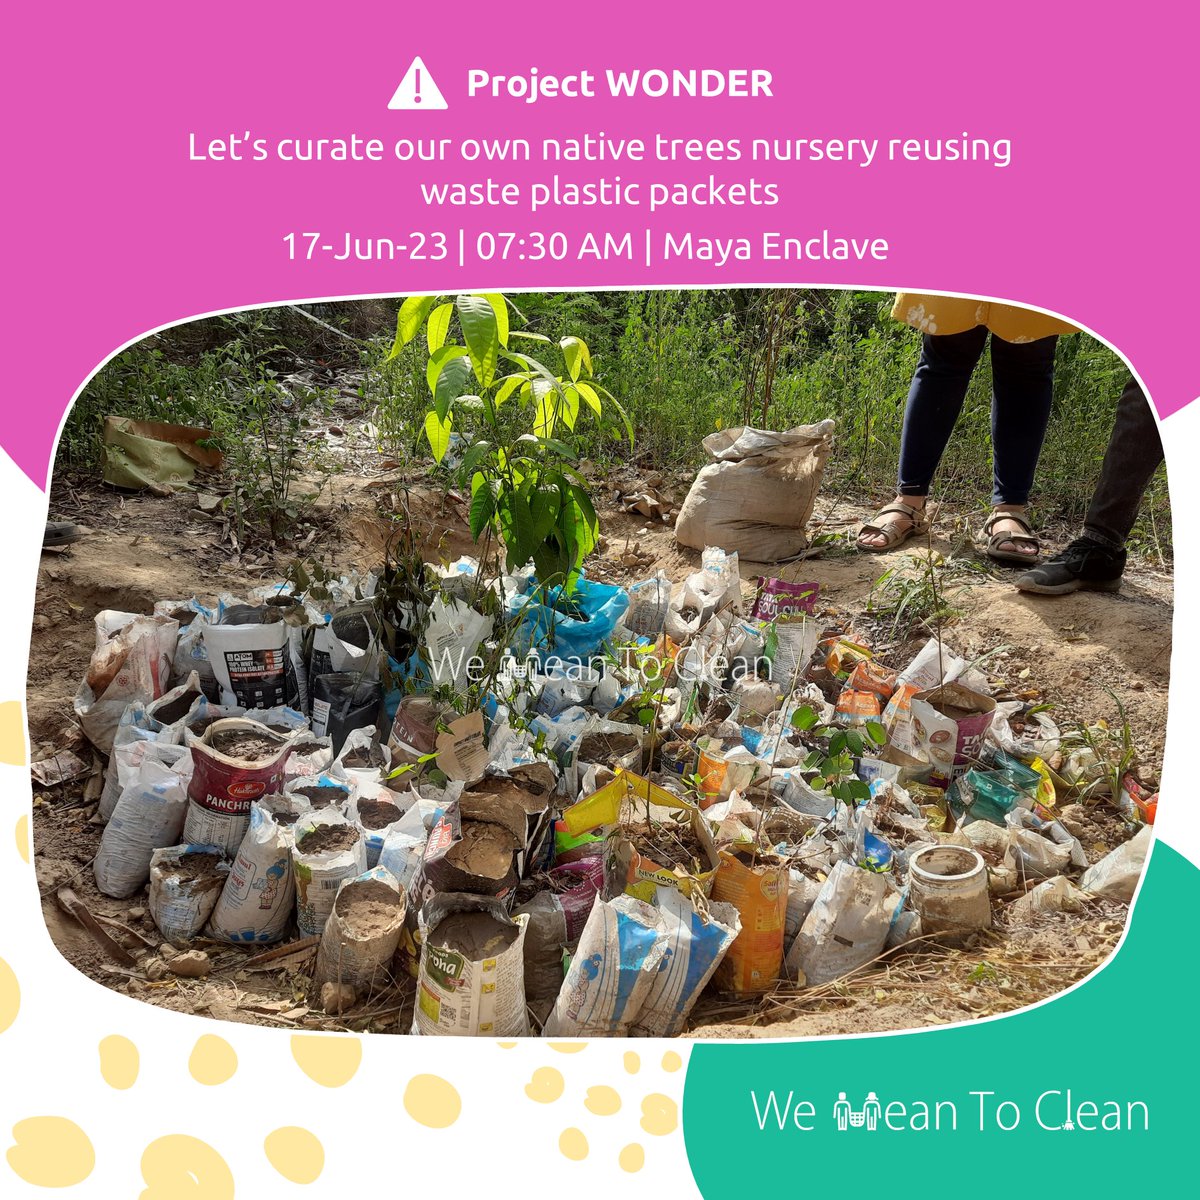 #ProjectWONDER We're reusing waste plastic packets to create a native trees nursery Join us! Visit meetup.com/we-mean-to-cle… #WeMeanToClean #CleanDelhi #SwachhBharat #MyCleanIndia #AirPollution #DelhiPollution #DelhiAirPollution #ClimateAction #Reuse #WasteManagement